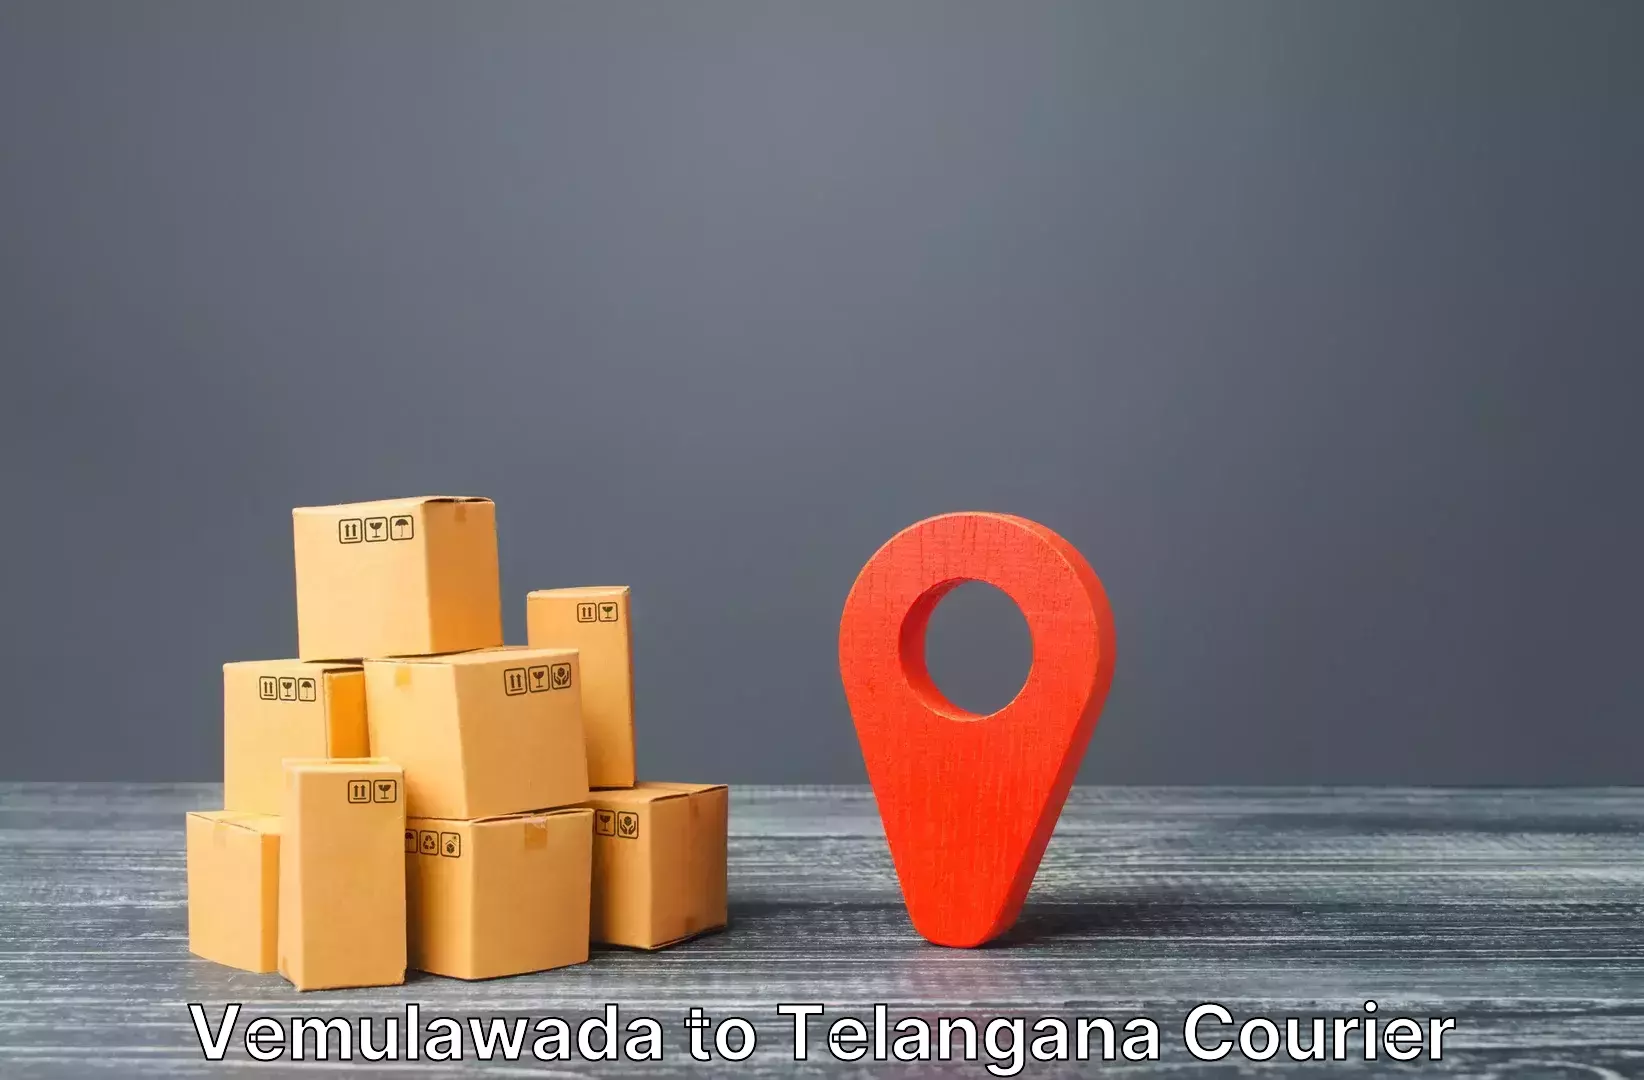 Luggage transport consulting Vemulawada to Wanaparthy